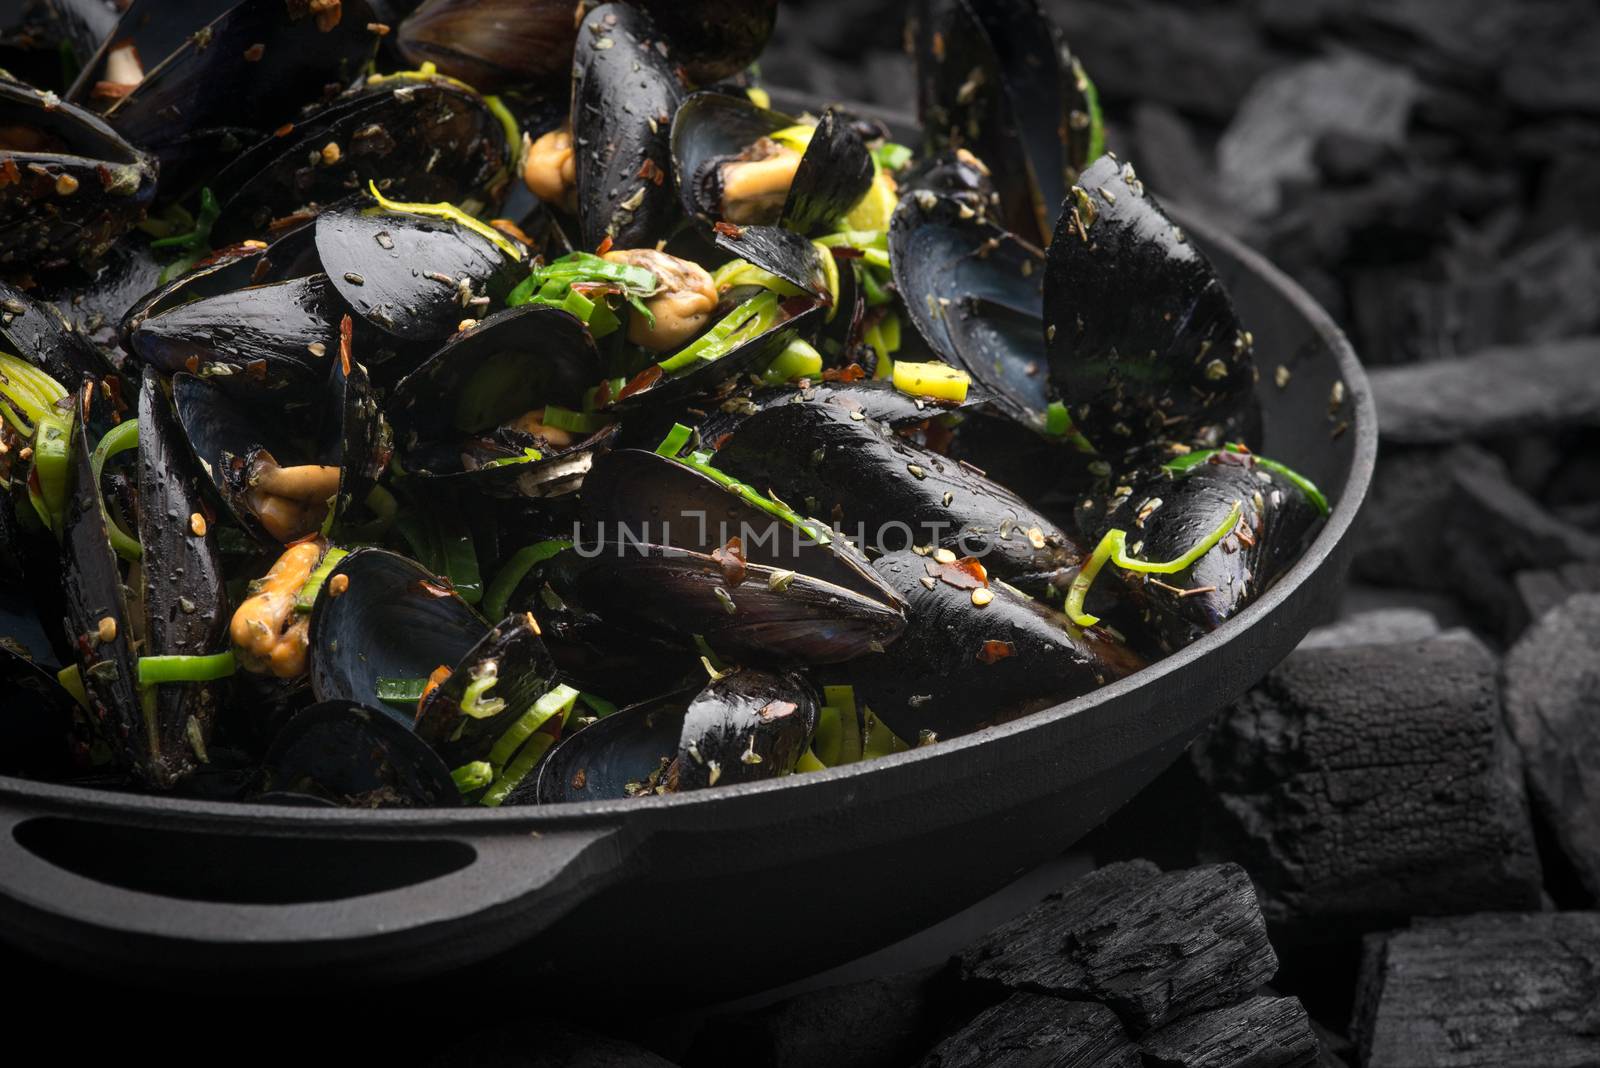 Steamed Mussels with vegetables in a black frying pan on the coa by shivanetua